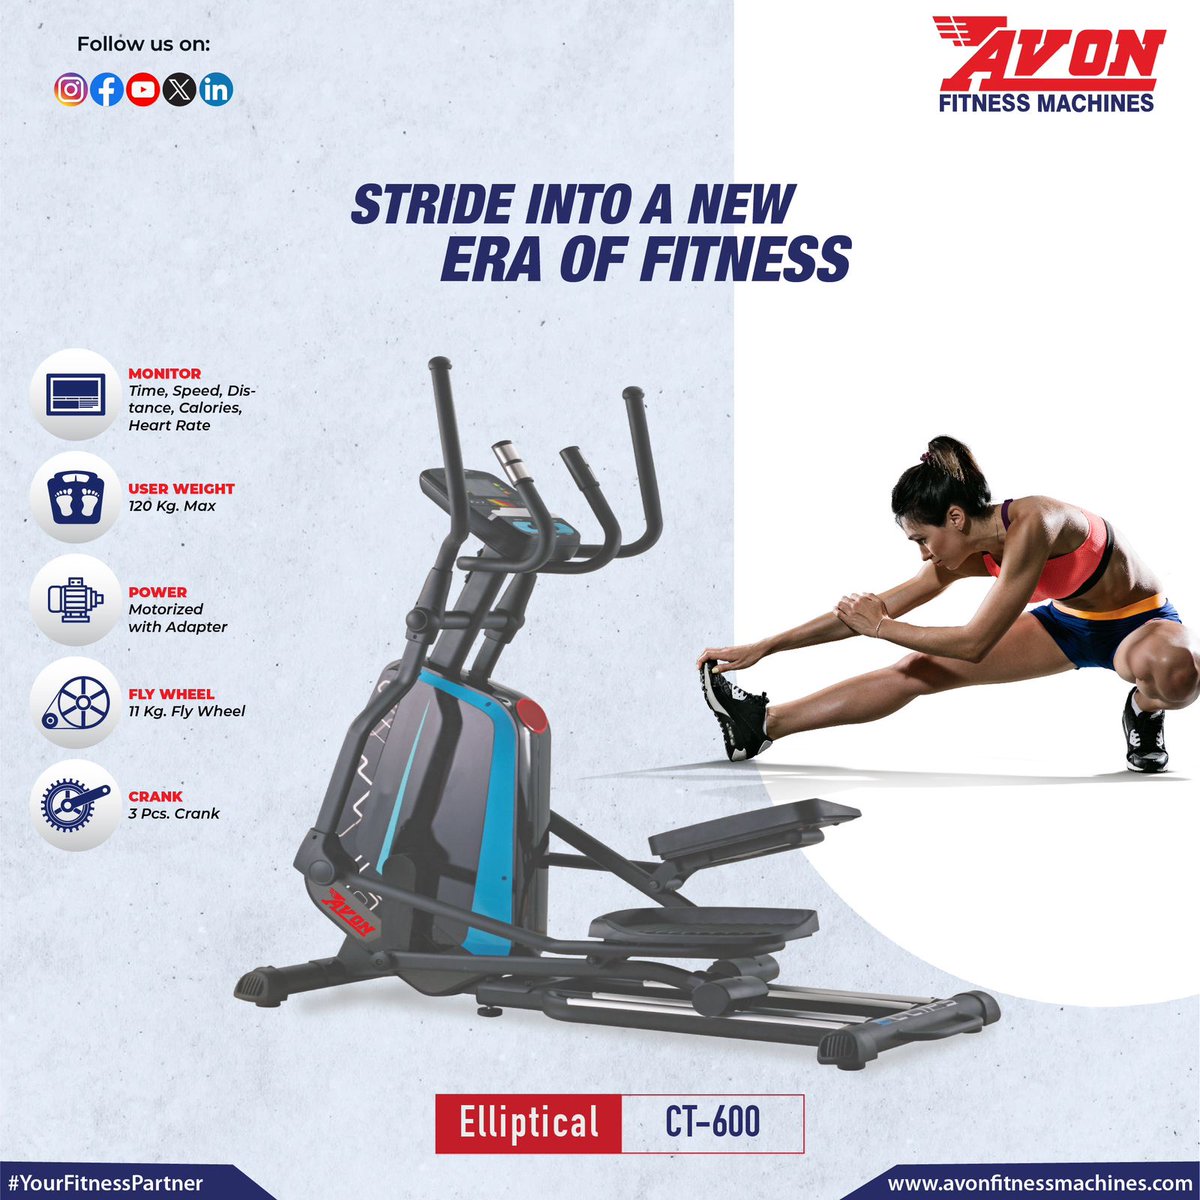 Let Avon fitness equipment redefine your fitness objective and be your partner in pushing yourself above your imagined boundaries.

#chestpress #excercising #workoutmotivation #workoutspecialist #workoutroutine #fitnessinfluencer #fitnessismylife #fitbody #cardioworkout